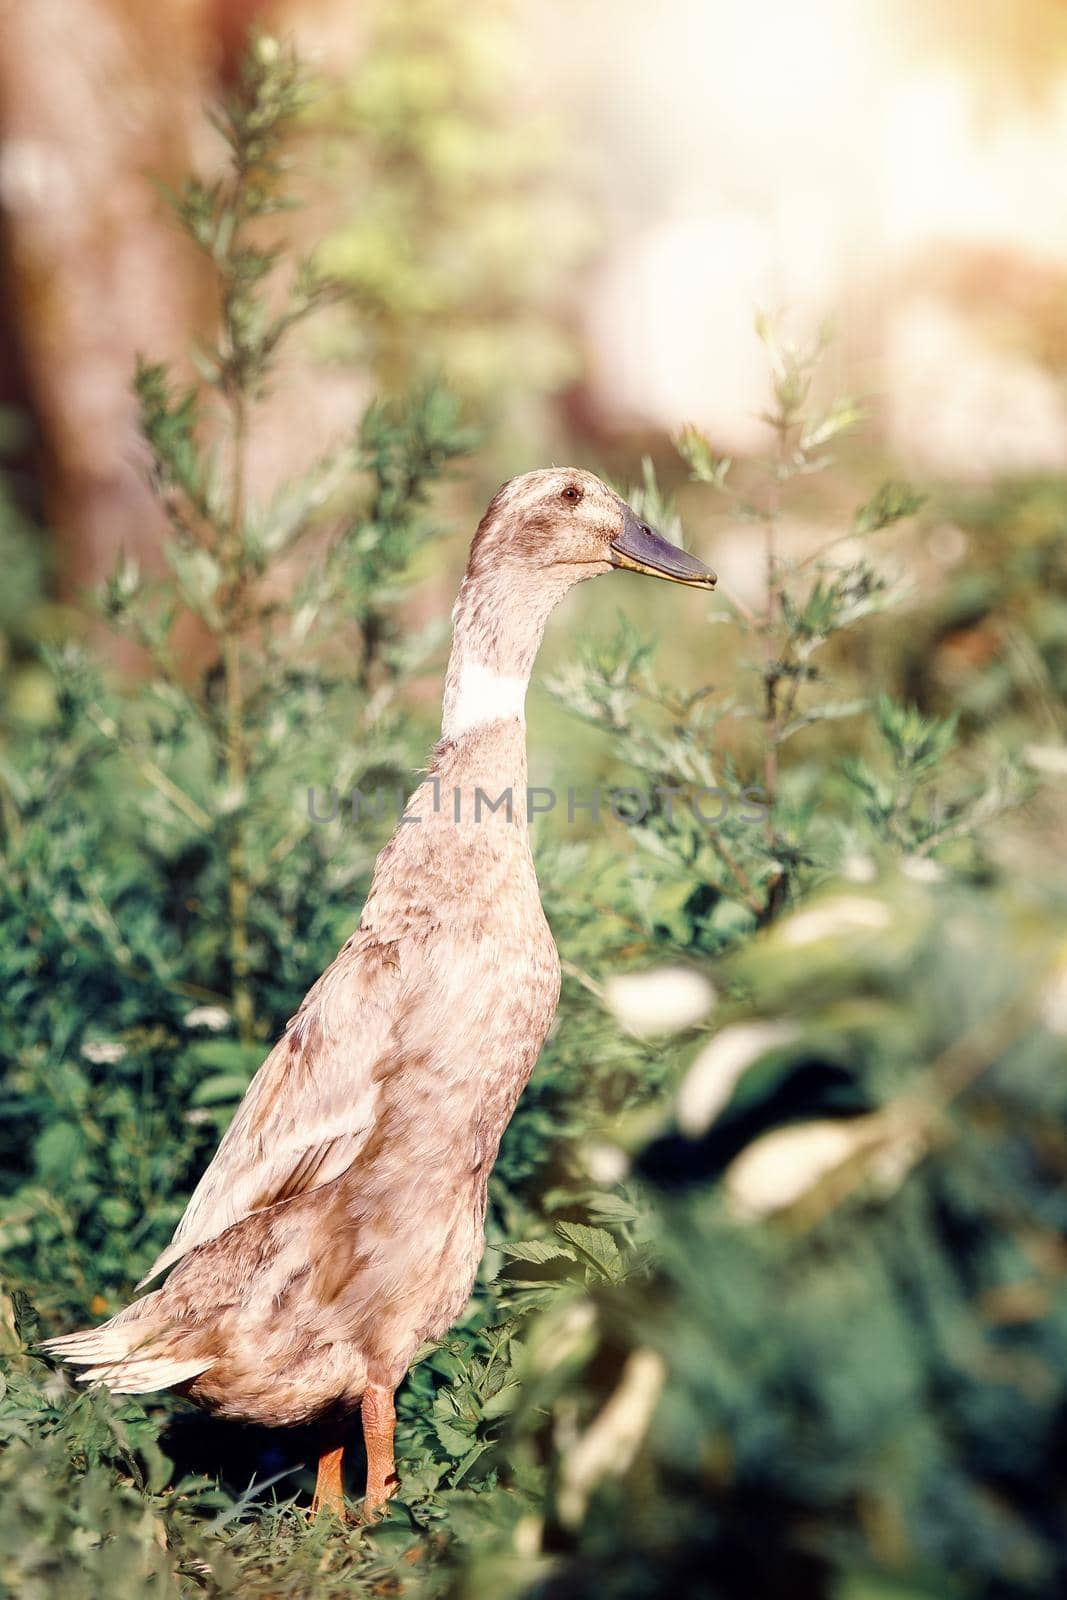 The brown Indian runner duck stands in profile, in the garden among the green vegetation.